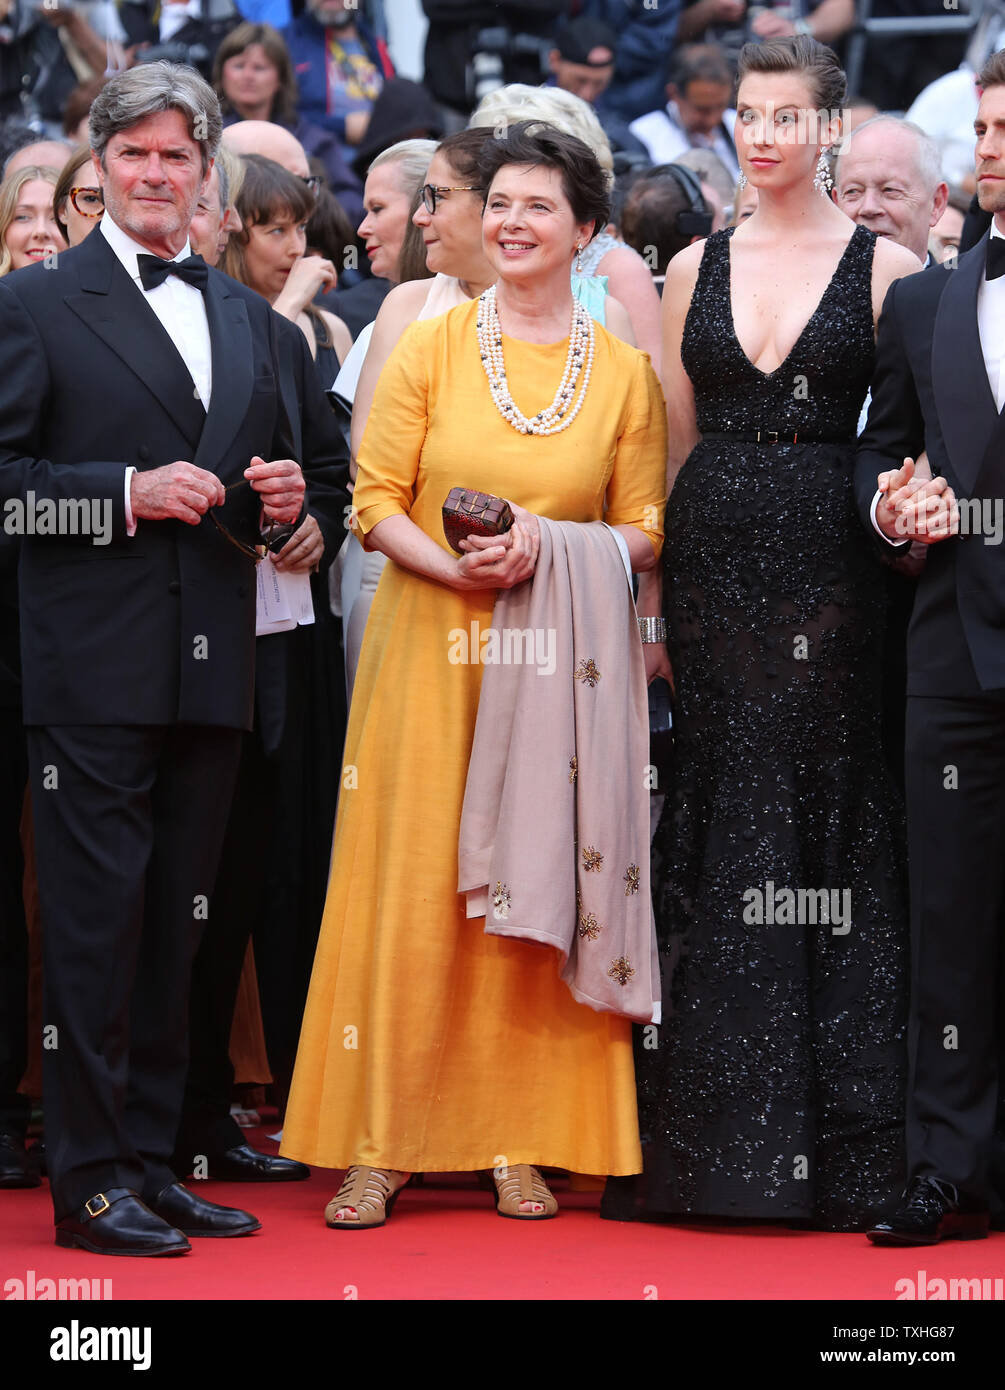 Isabella Rossellini (L) and Elettra Rossellini Wiedemann arrive on the red carpet before the screening of the film 'Sicario (Hitman)' during the 68th annual Cannes International Film Festival in Cannes, France on May 19, 2015.  Photo by David Silpa/UPI Stock Photo